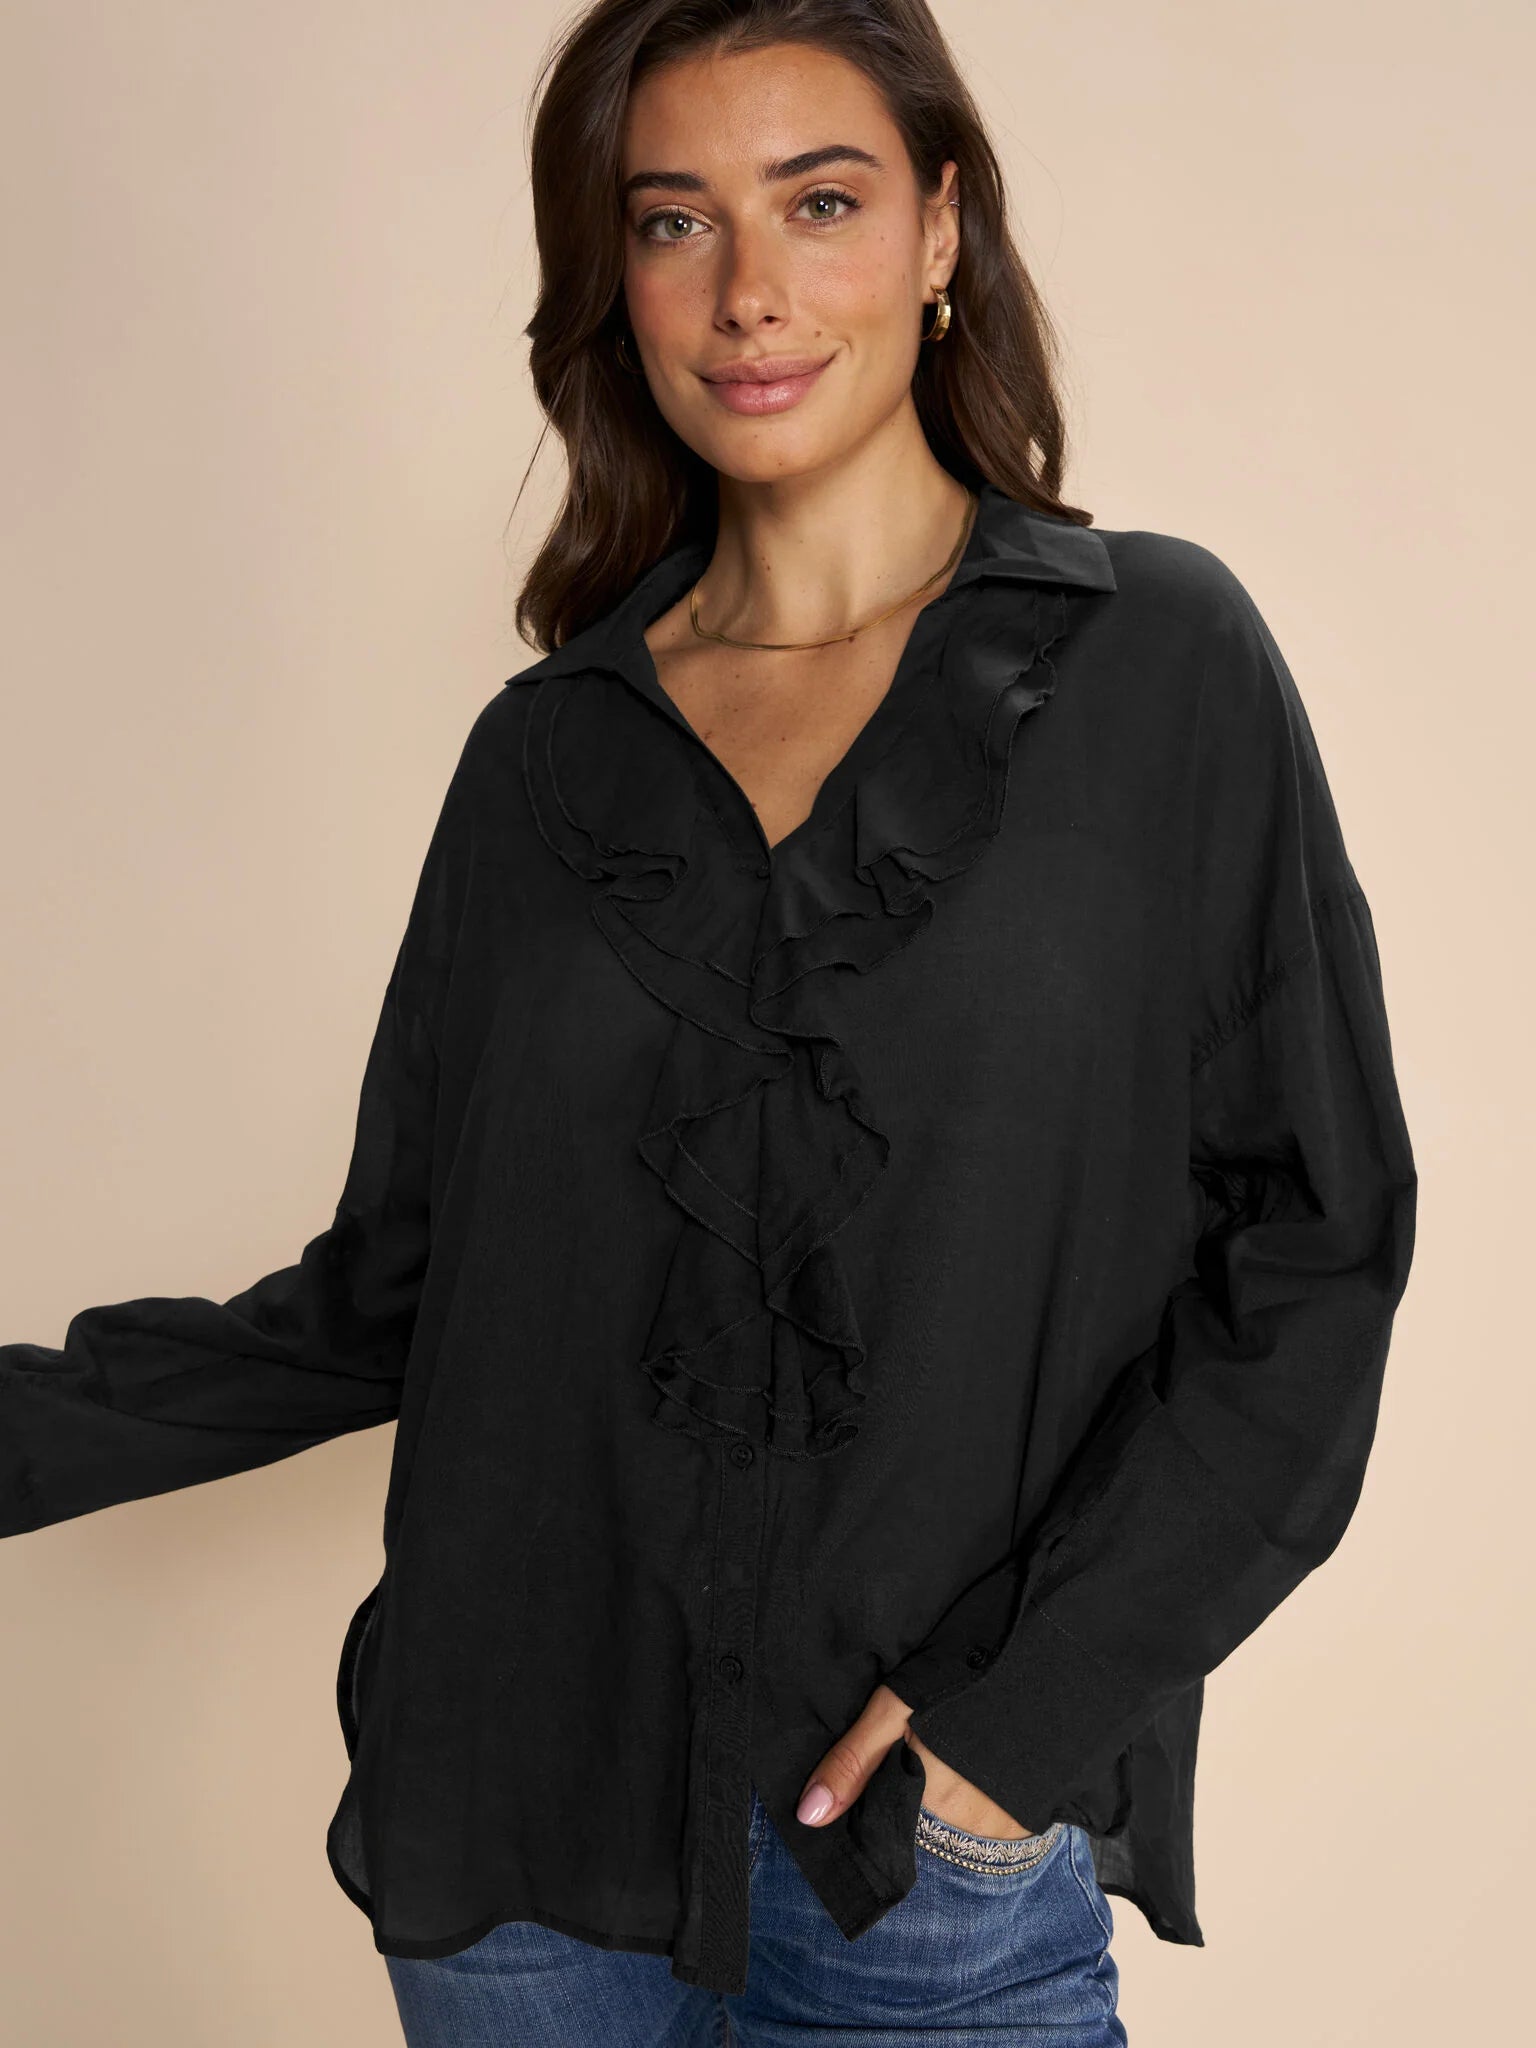 Jelena Voile Shirt by Mos Mosh